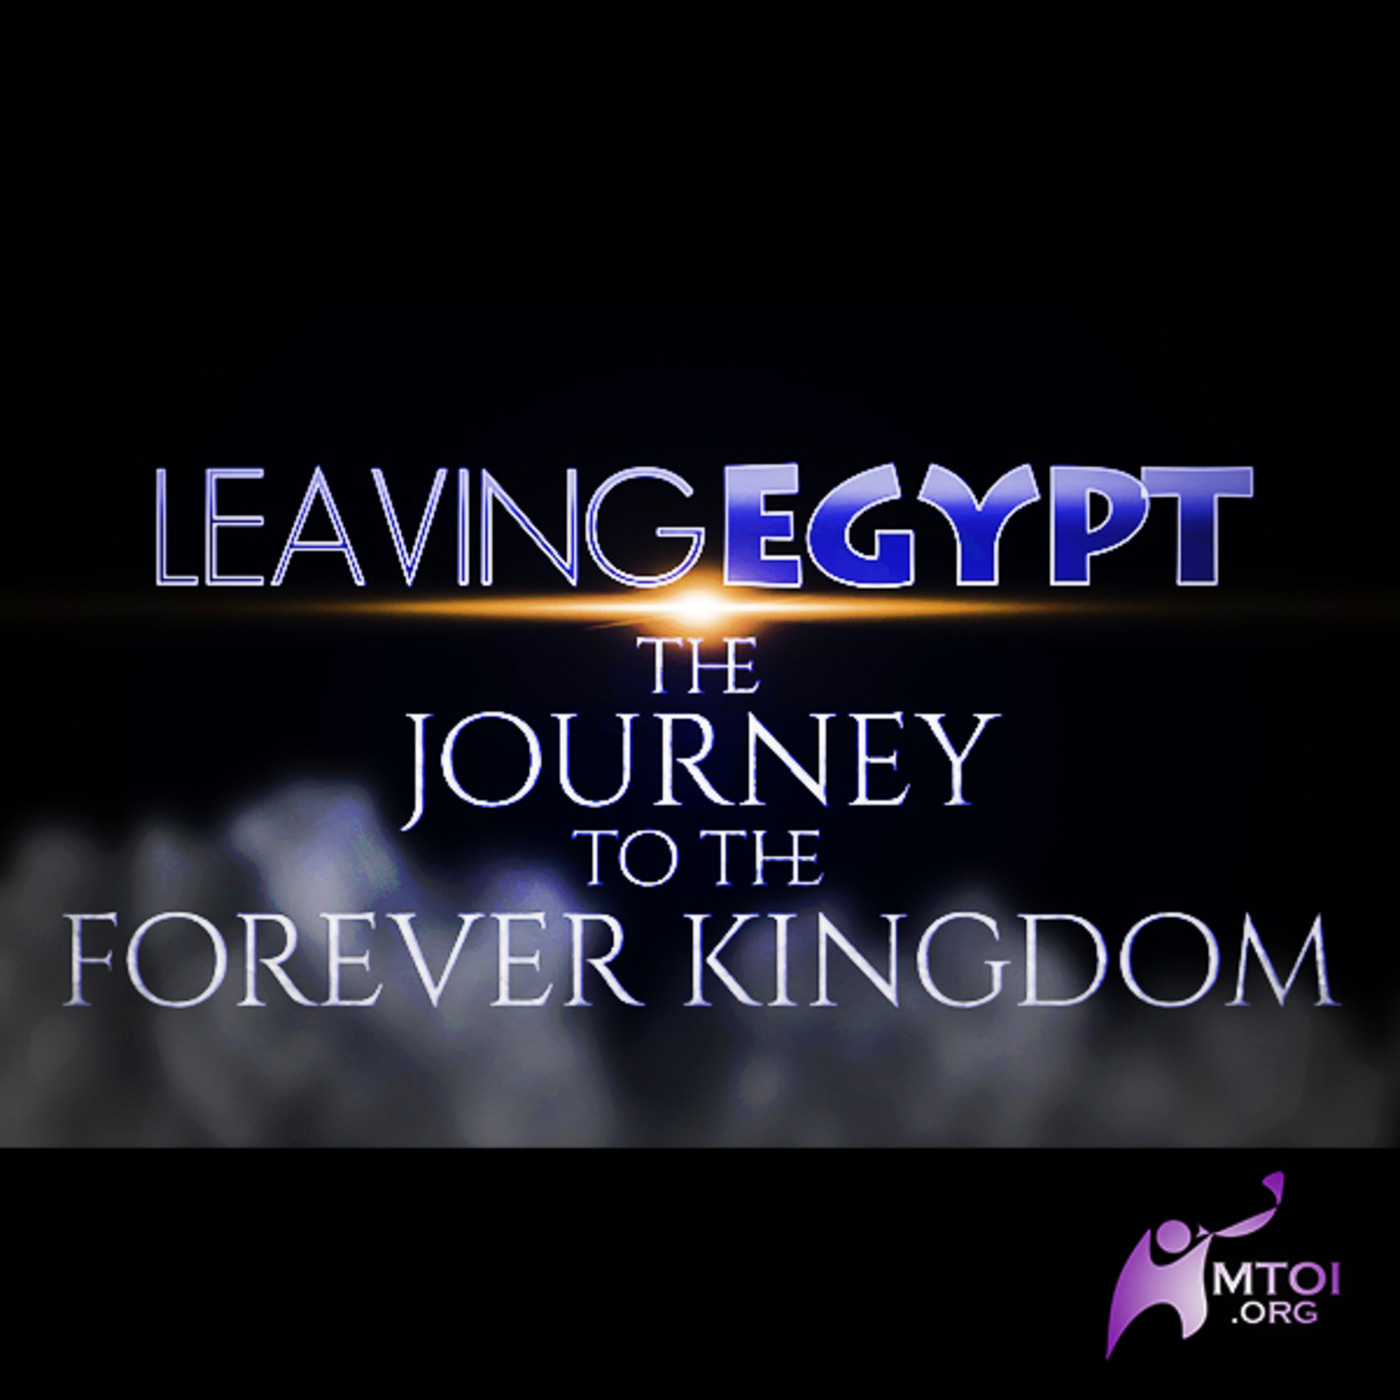 Leaving Egypt: The Journey to the Forever Kingdom